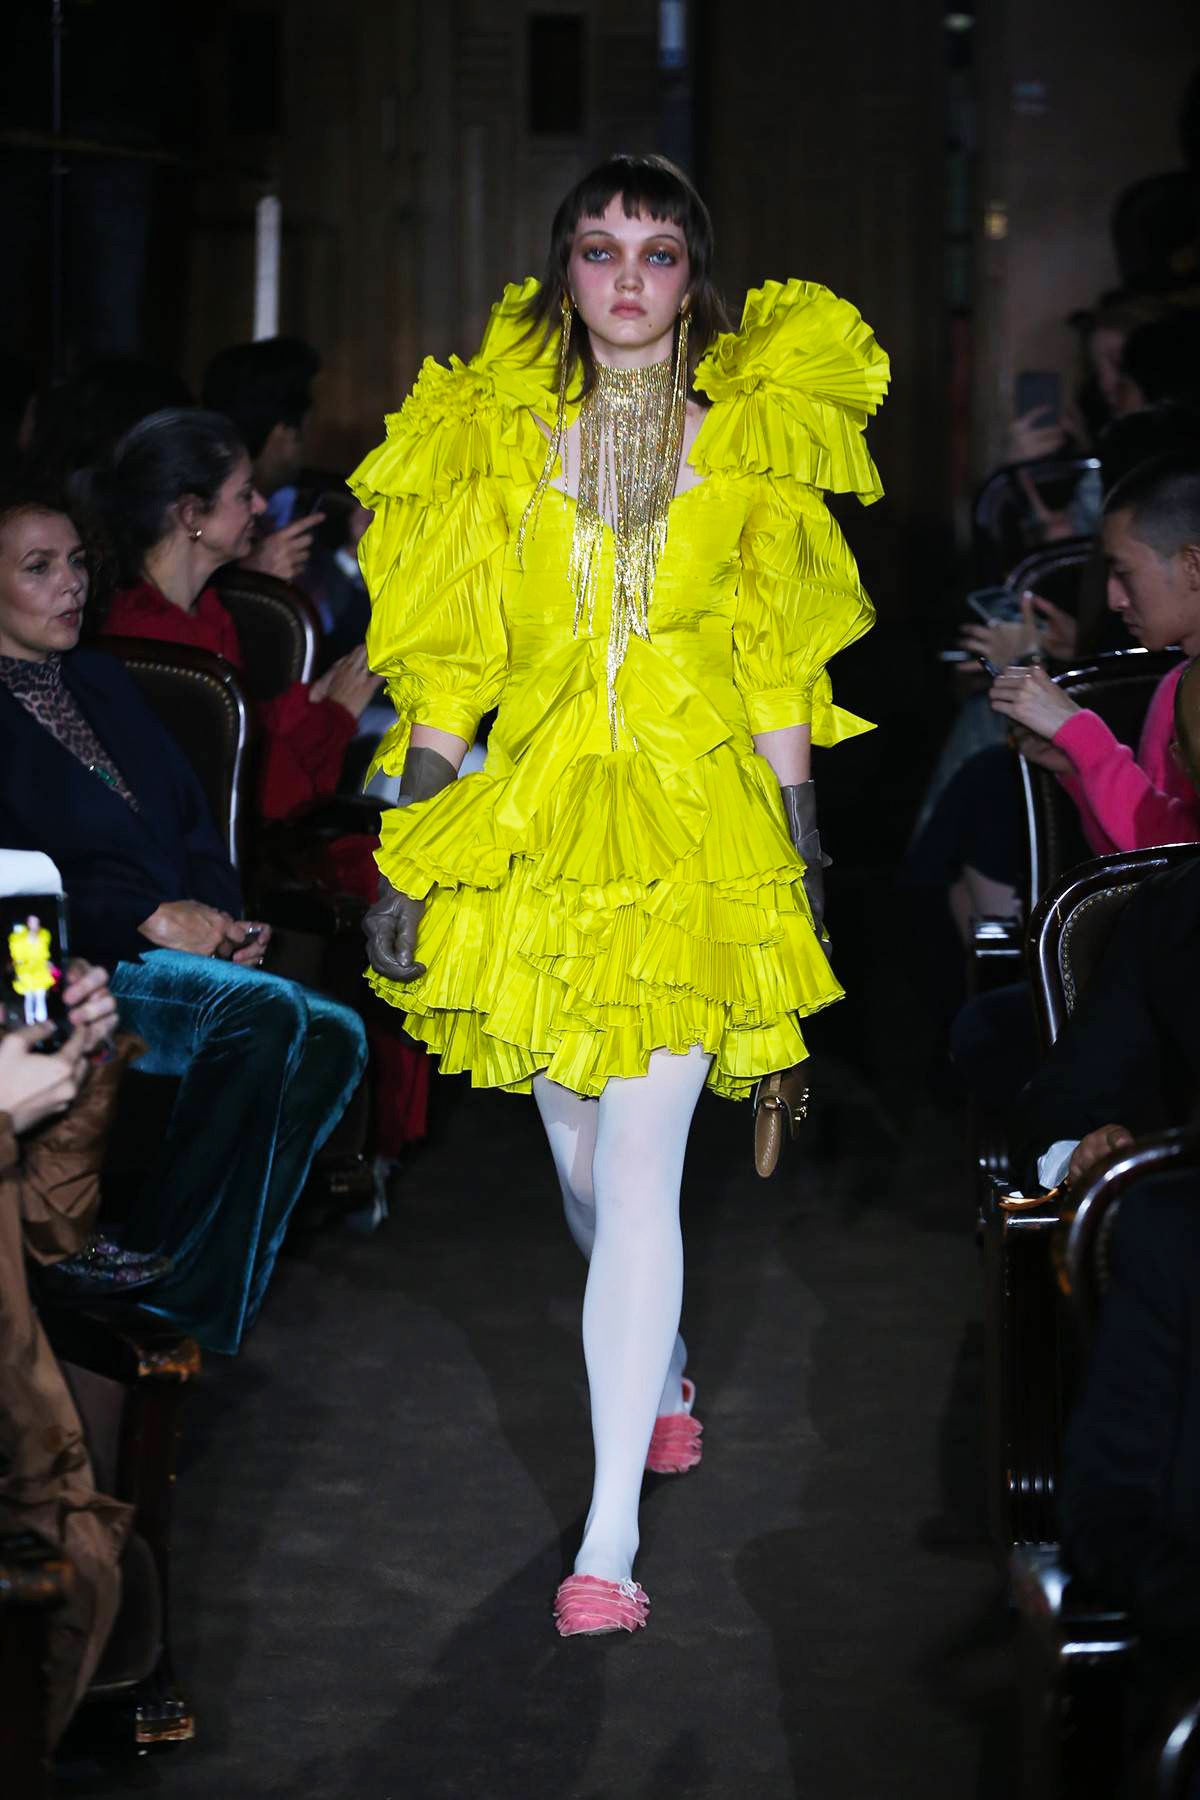 Top 10 Paris Spring 2019 Collections and Fashion Shows - The Impression